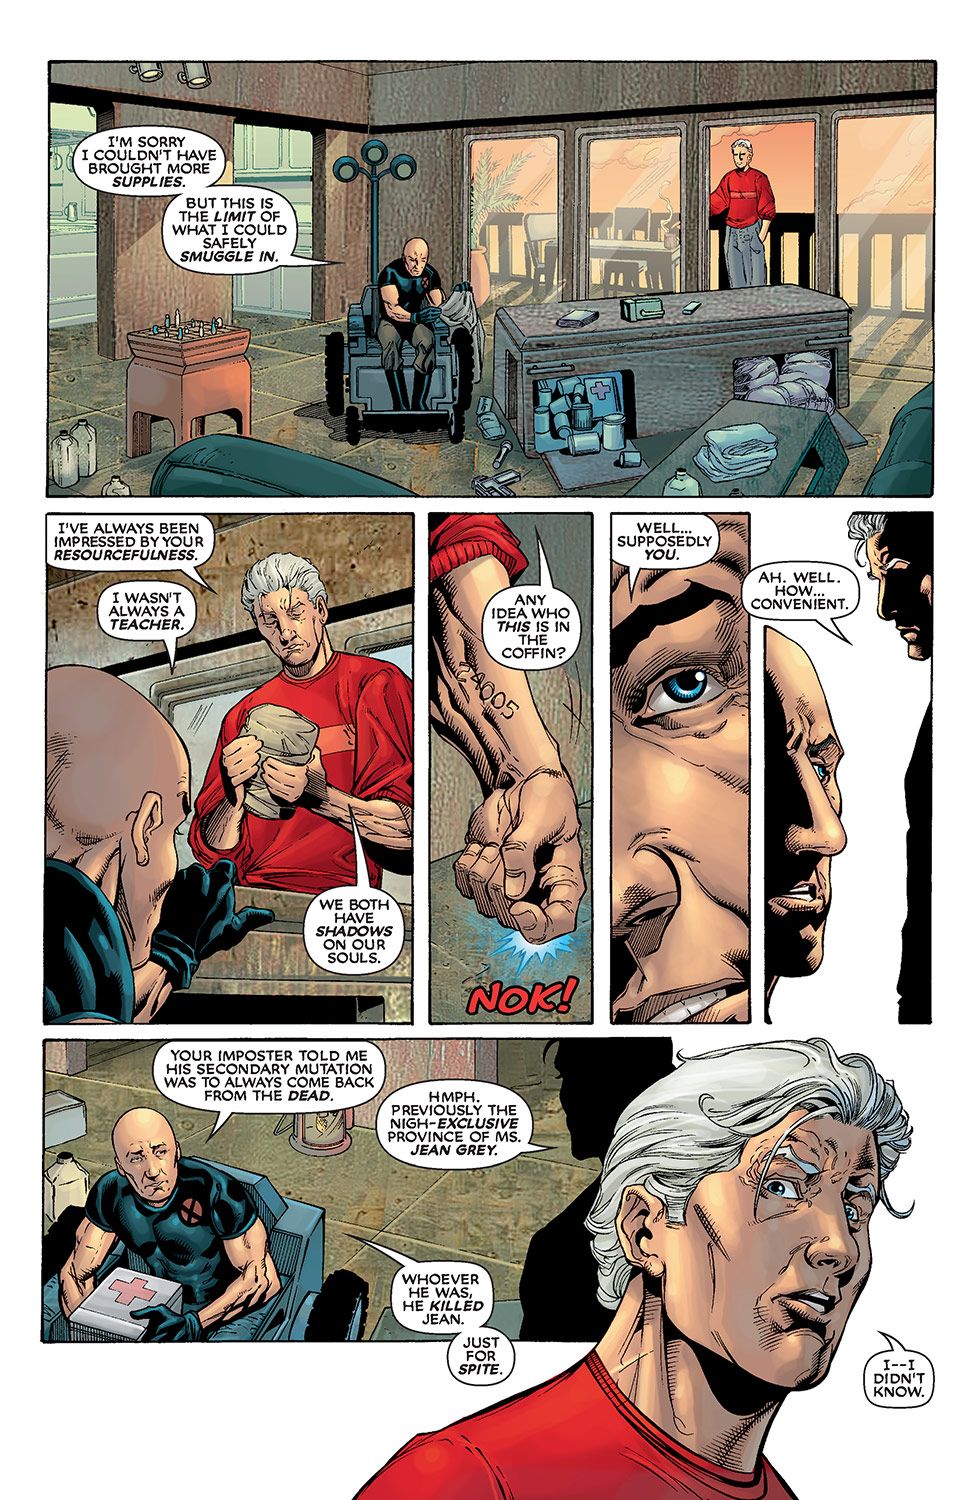 Magneto reveals that he was NOT Xorn